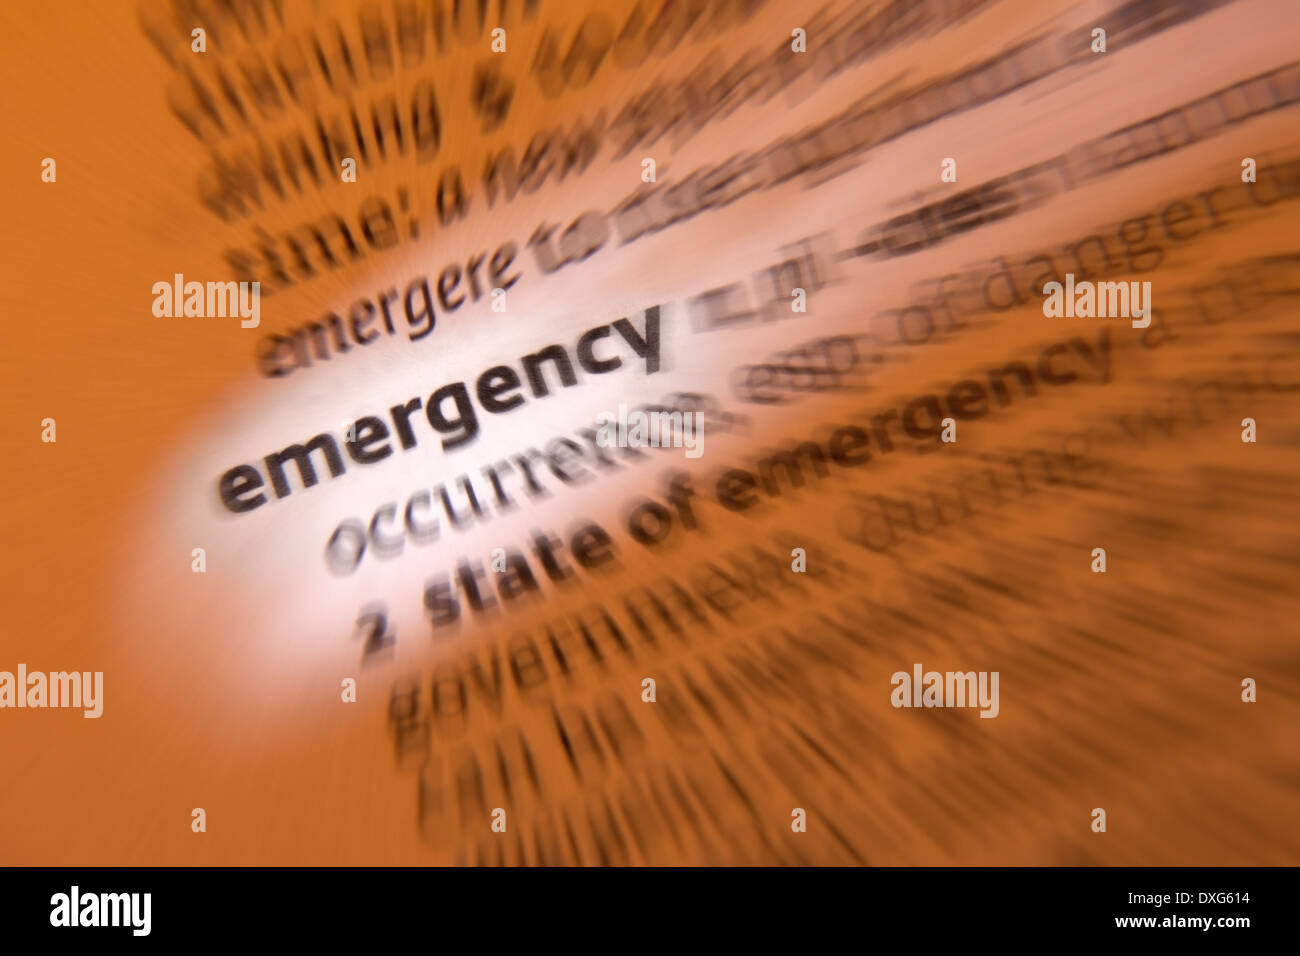 Emergency - a serious, unexpected, and often dangerous situation requiring immediate action. Stock Photo